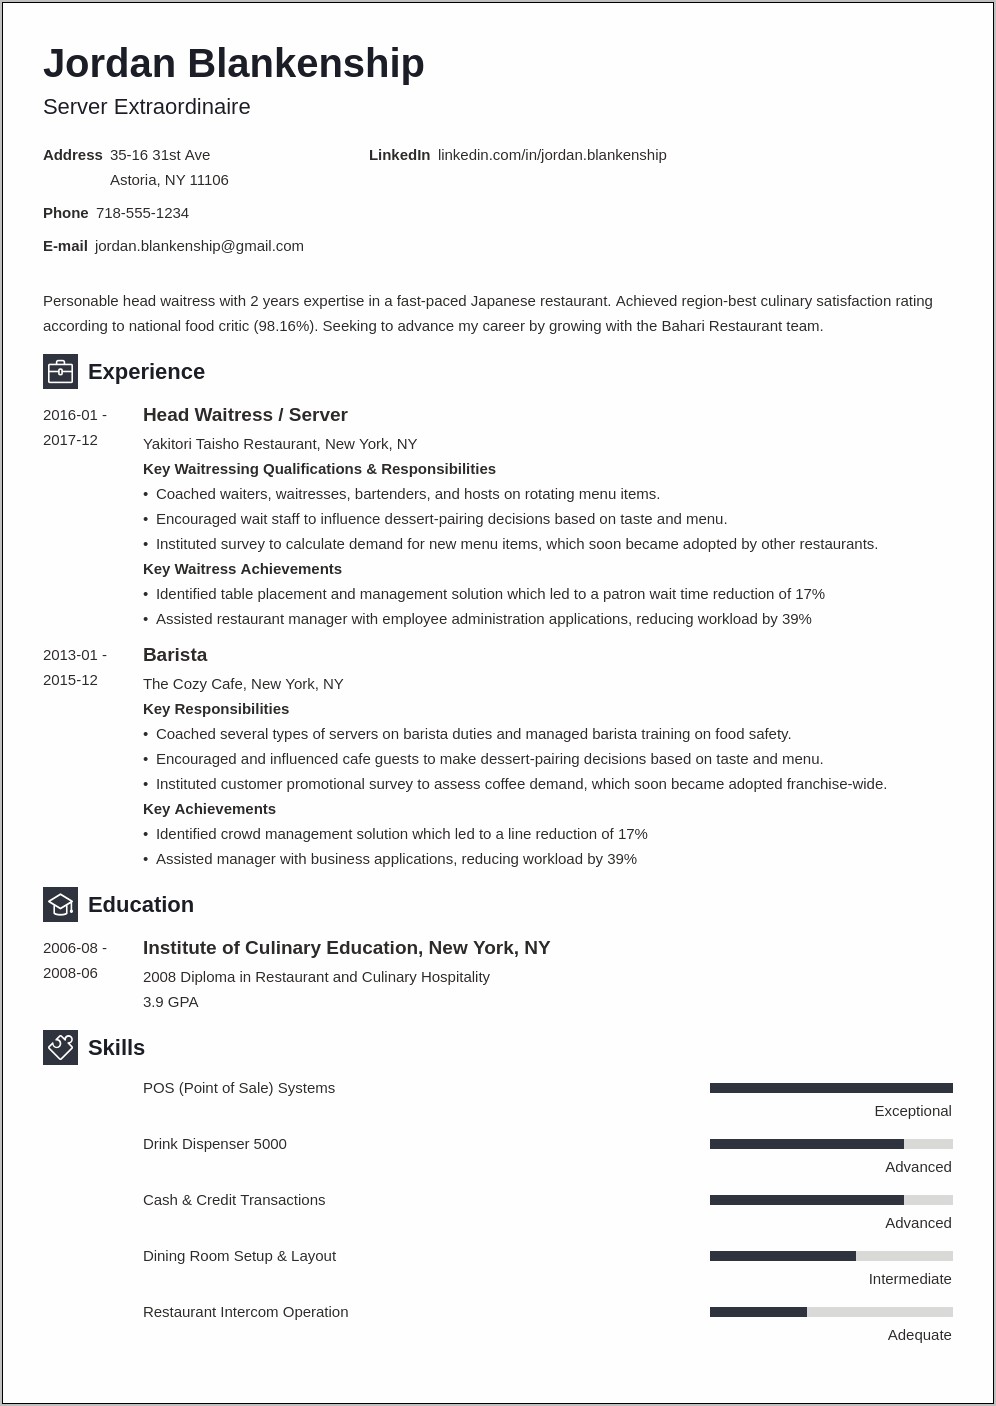 Food Service Skills And Abilities For Resume